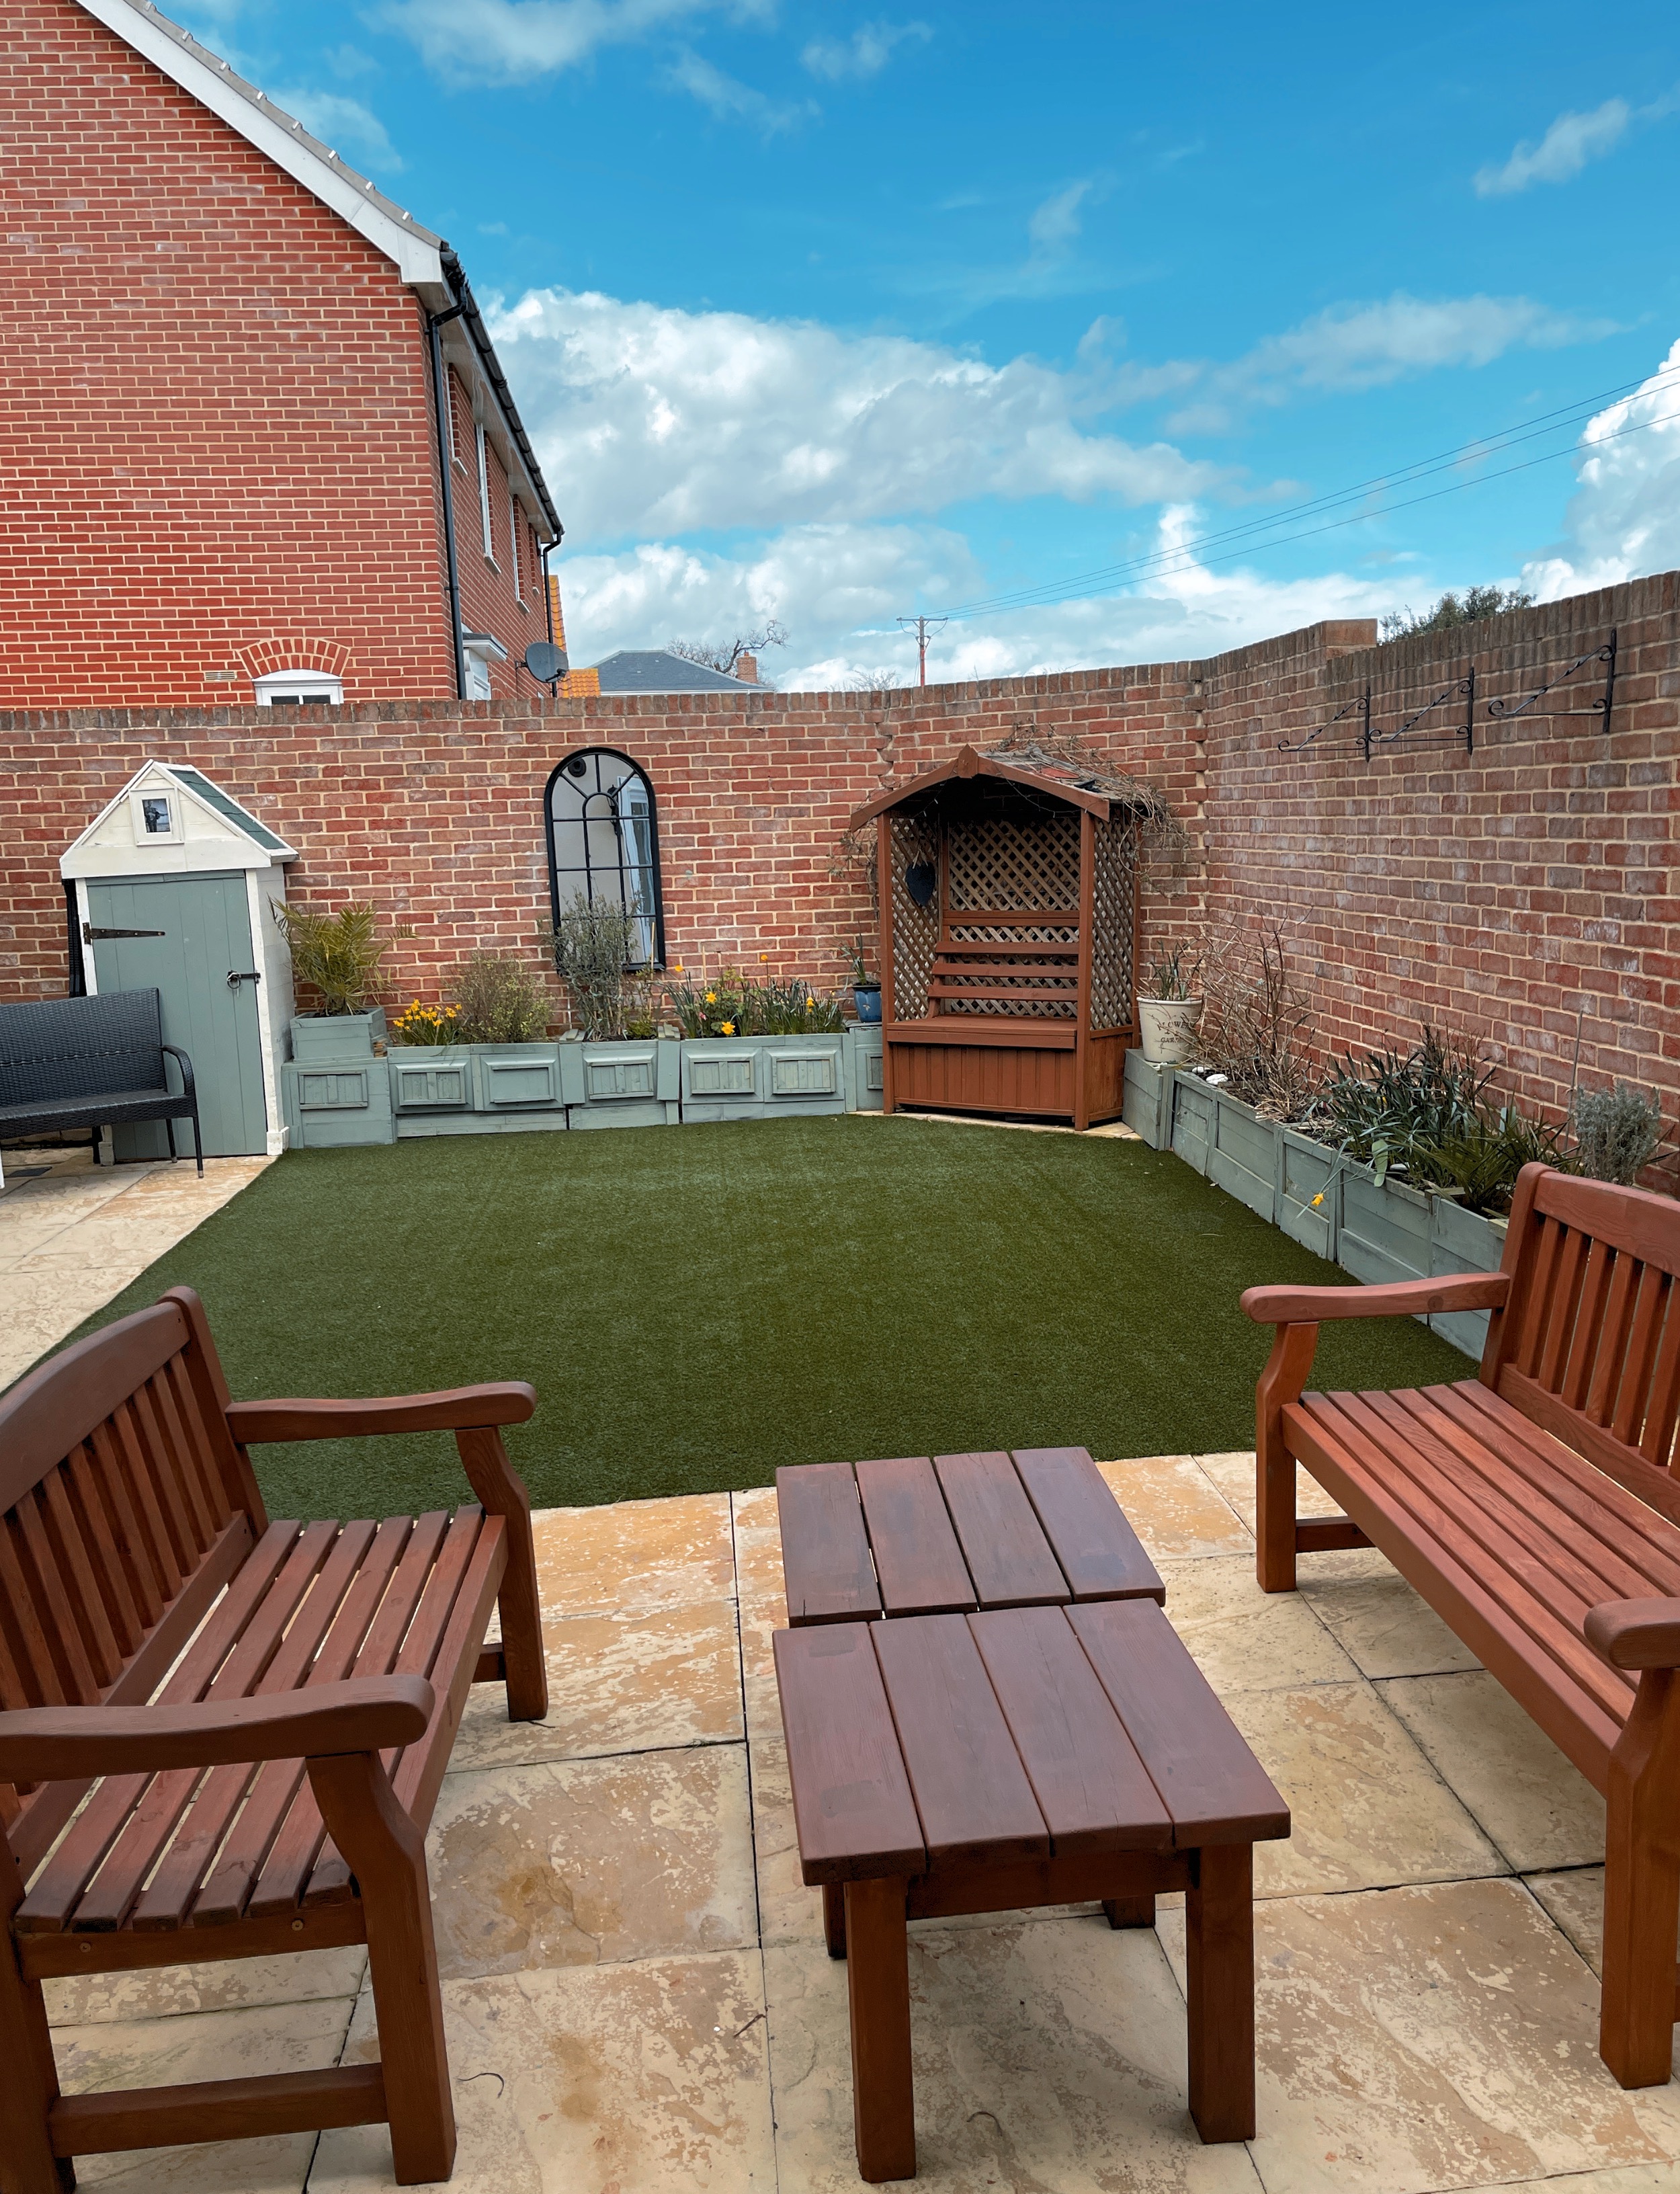 Painted and polished garden furniture            30th March 2023